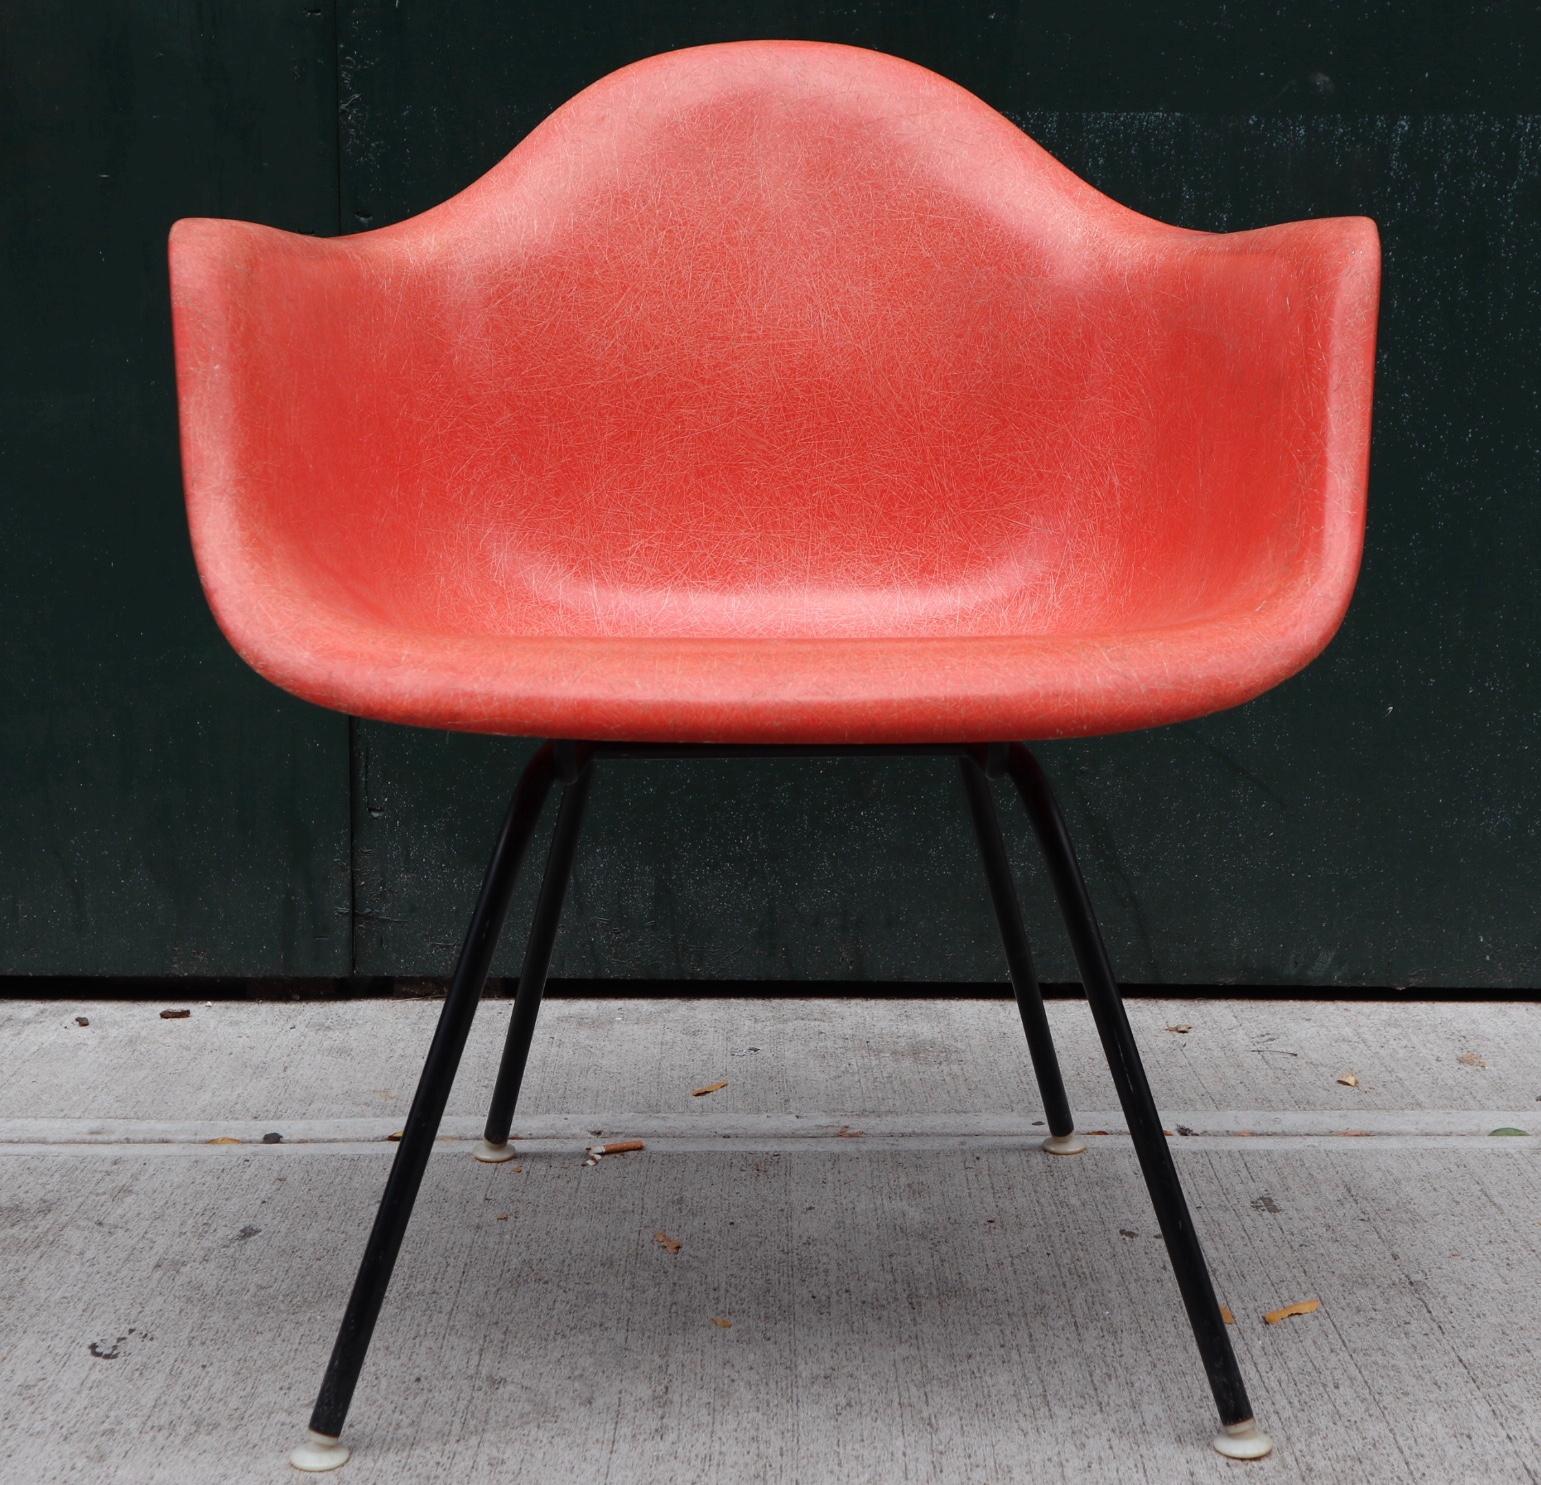 Amazing color on this Eames fiberglass armshell for Herman Miller. Beautiful orange tone contrasts nicely against black lounge height base. No cracks or major wear. Even color throughout. Signed Herman Miller underneath the shell. All original